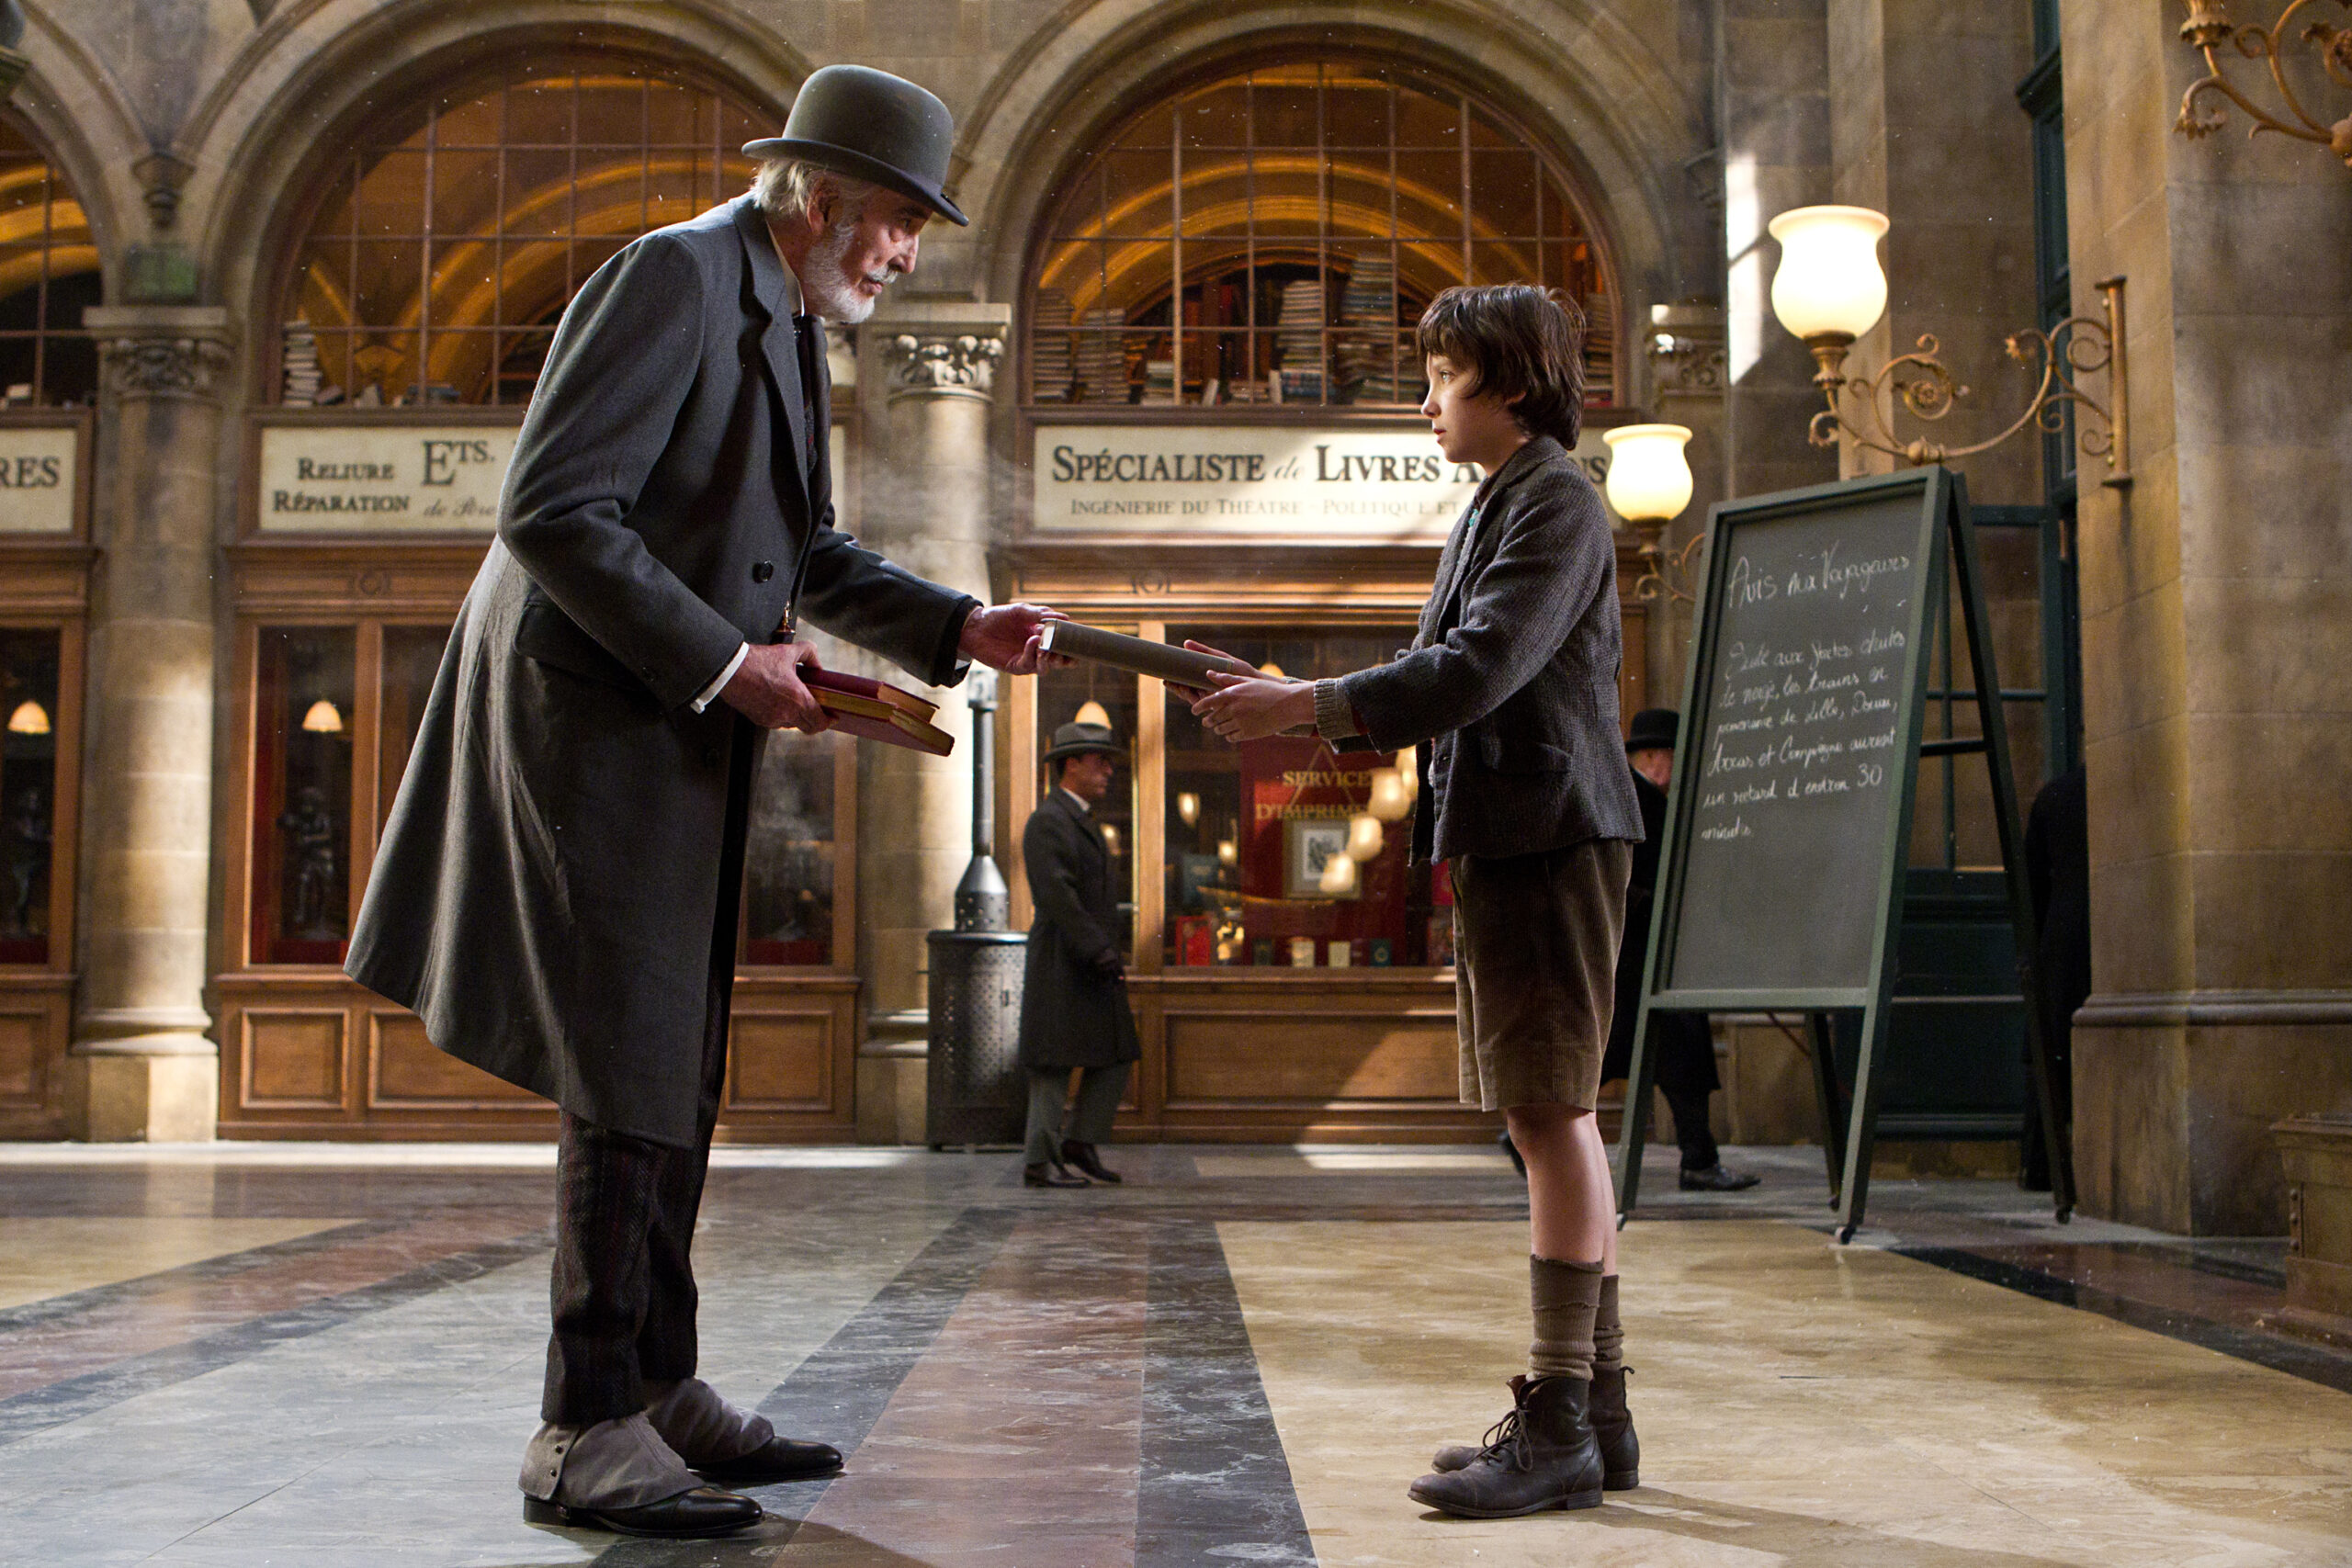 HUGO - Directed by Martin Scorsese - Int. Montparnasse Station, Stage Set - ©2011 - Sony Pictures